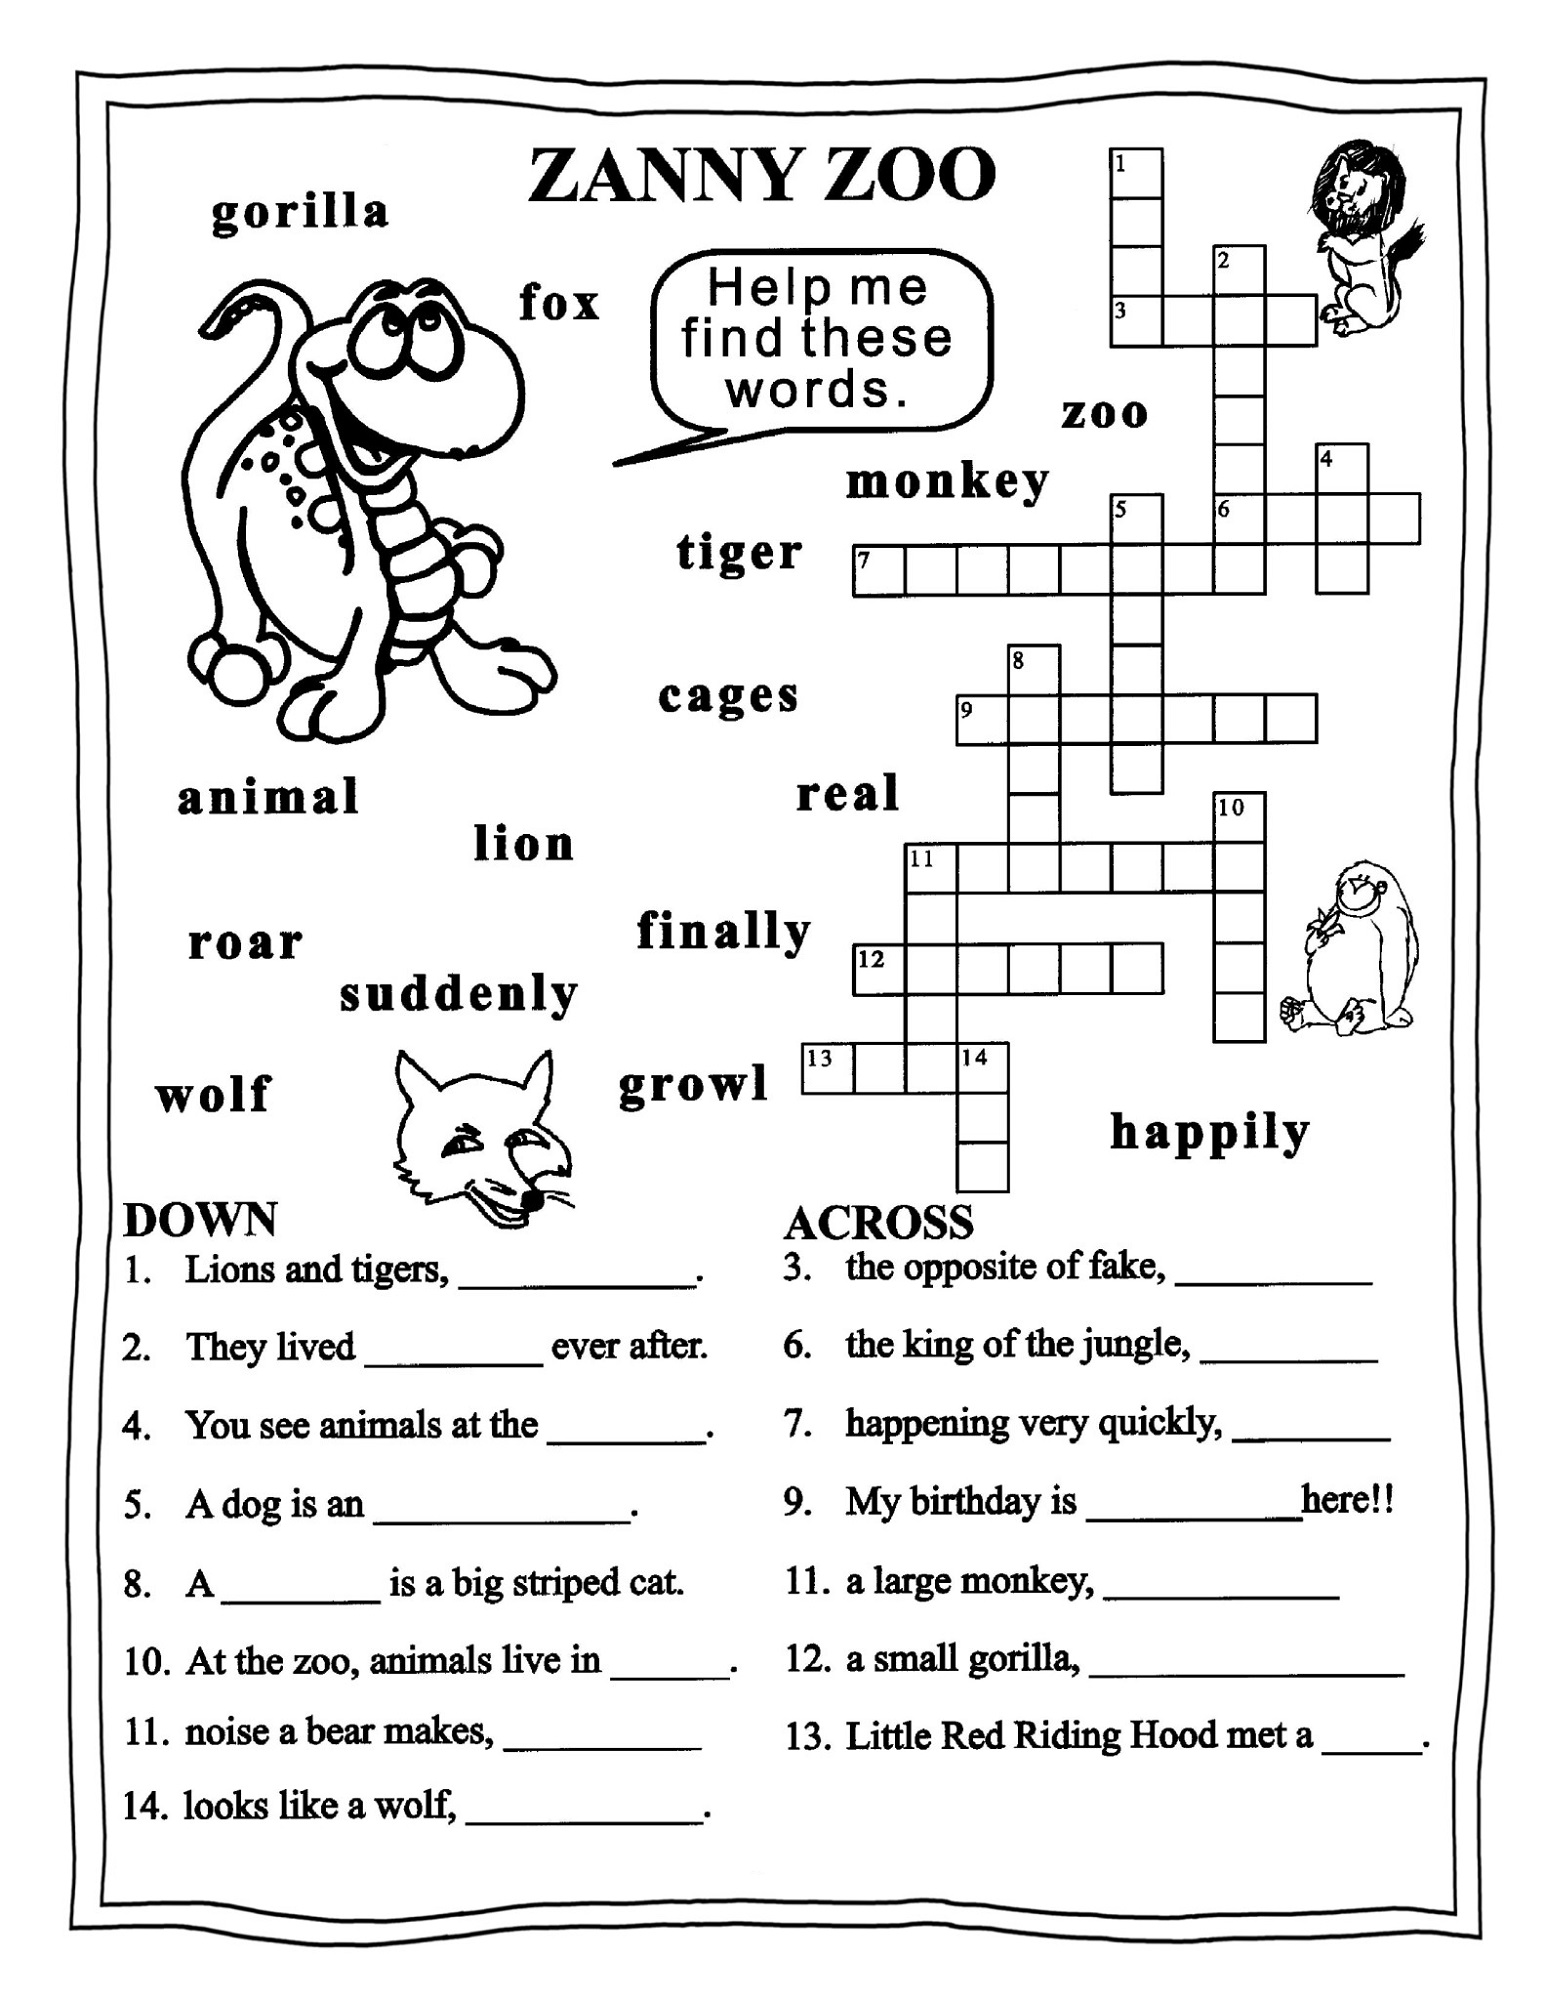 english-worksheets-for-grade-3